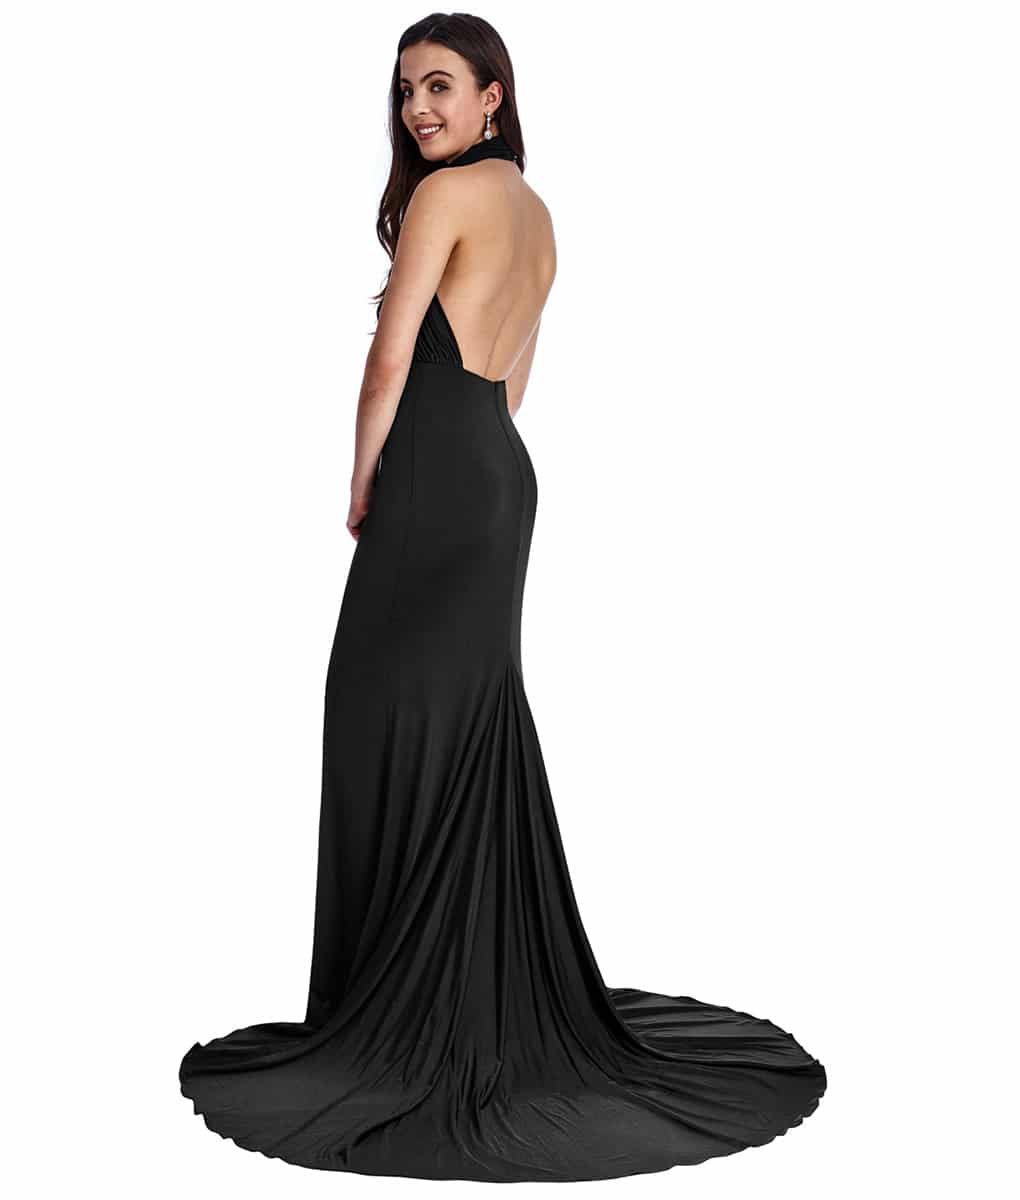 Alila Black Backless Gown